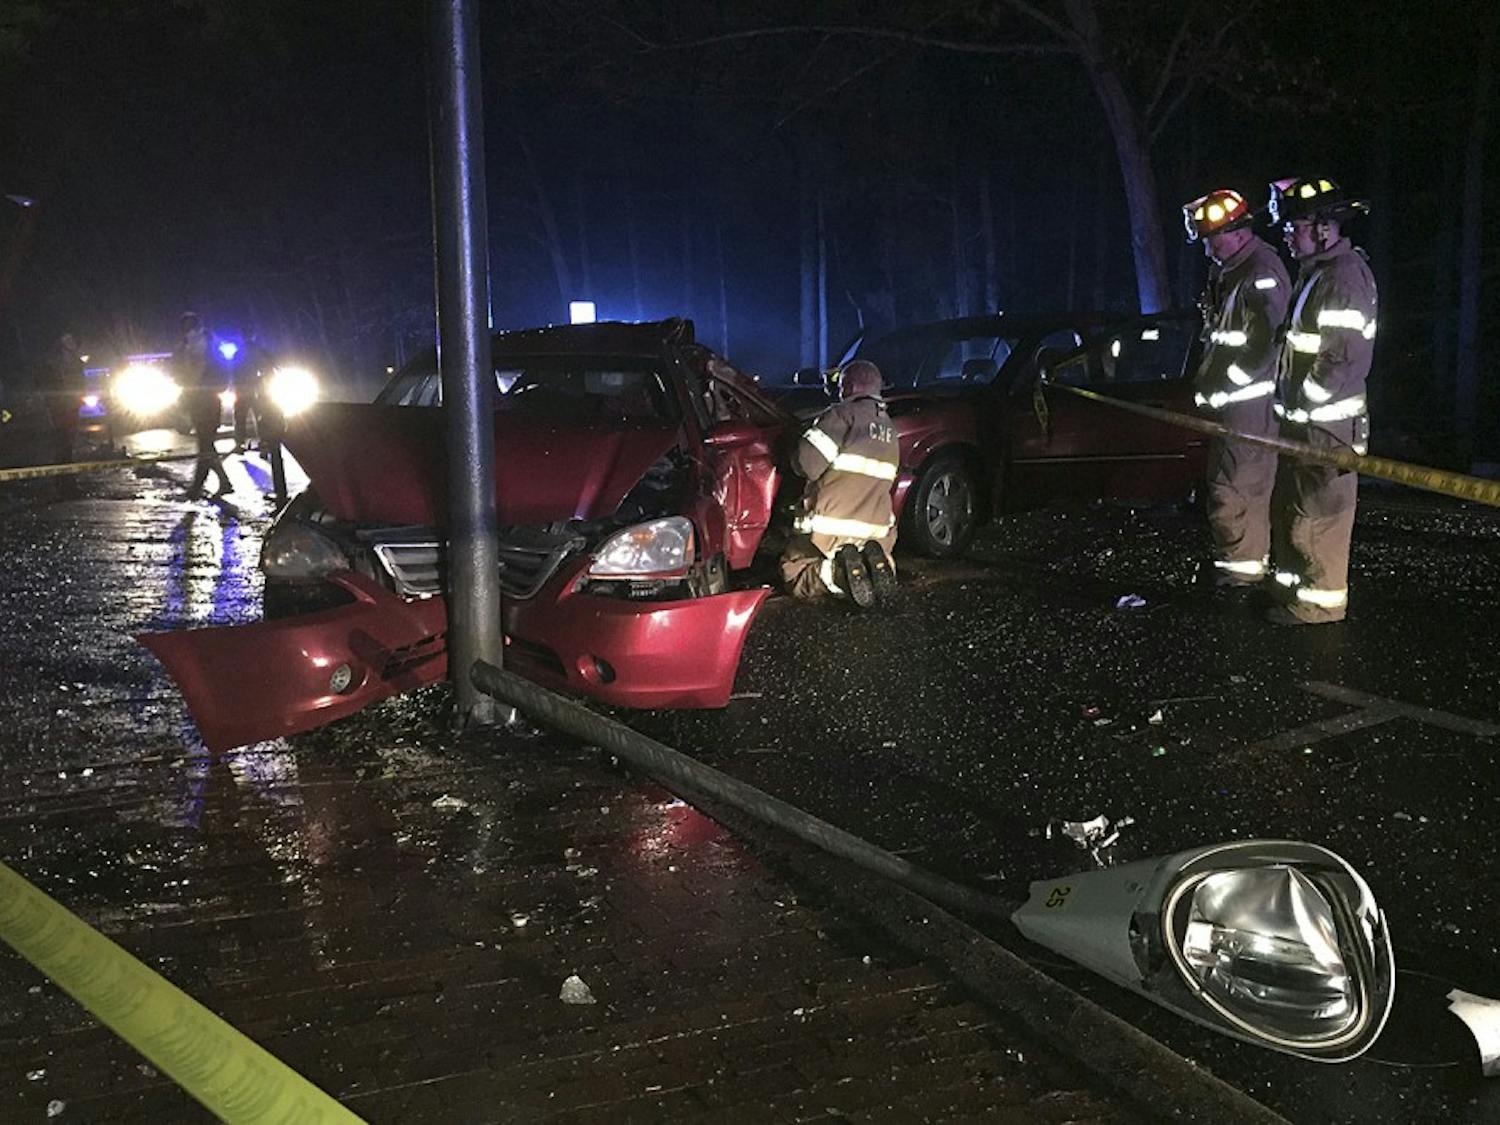 A driver crashed into a parked vehicle on Country Club Road behind Cobb Residence Hall early Wednesday morning and fled the scene before police arrived.